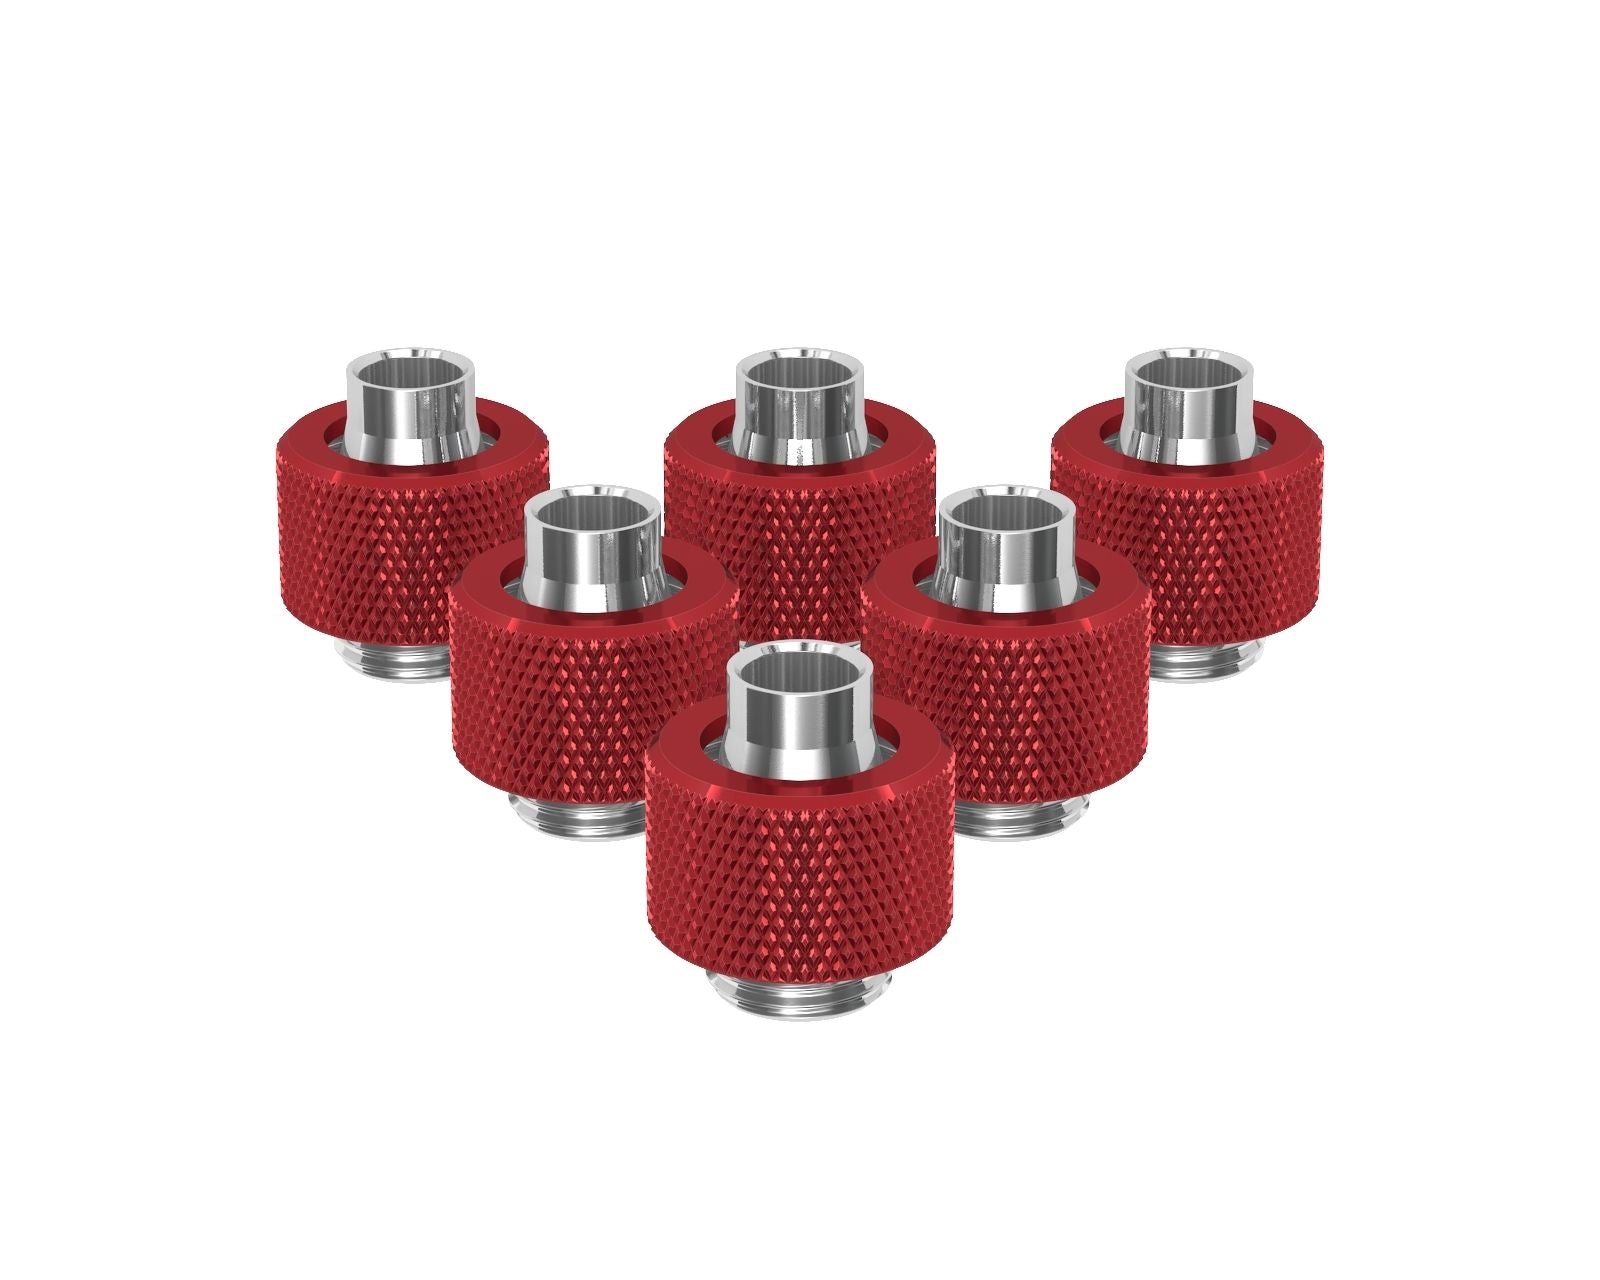 PrimoChill SecureFit SX - Premium Compression Fitting For 3/8in ID x 1/2in OD Flexible Tubing 6 Pack (F-SFSX12-6) - Available in 20+ Colors, Custom Watercooling Loop Ready - Candy Red